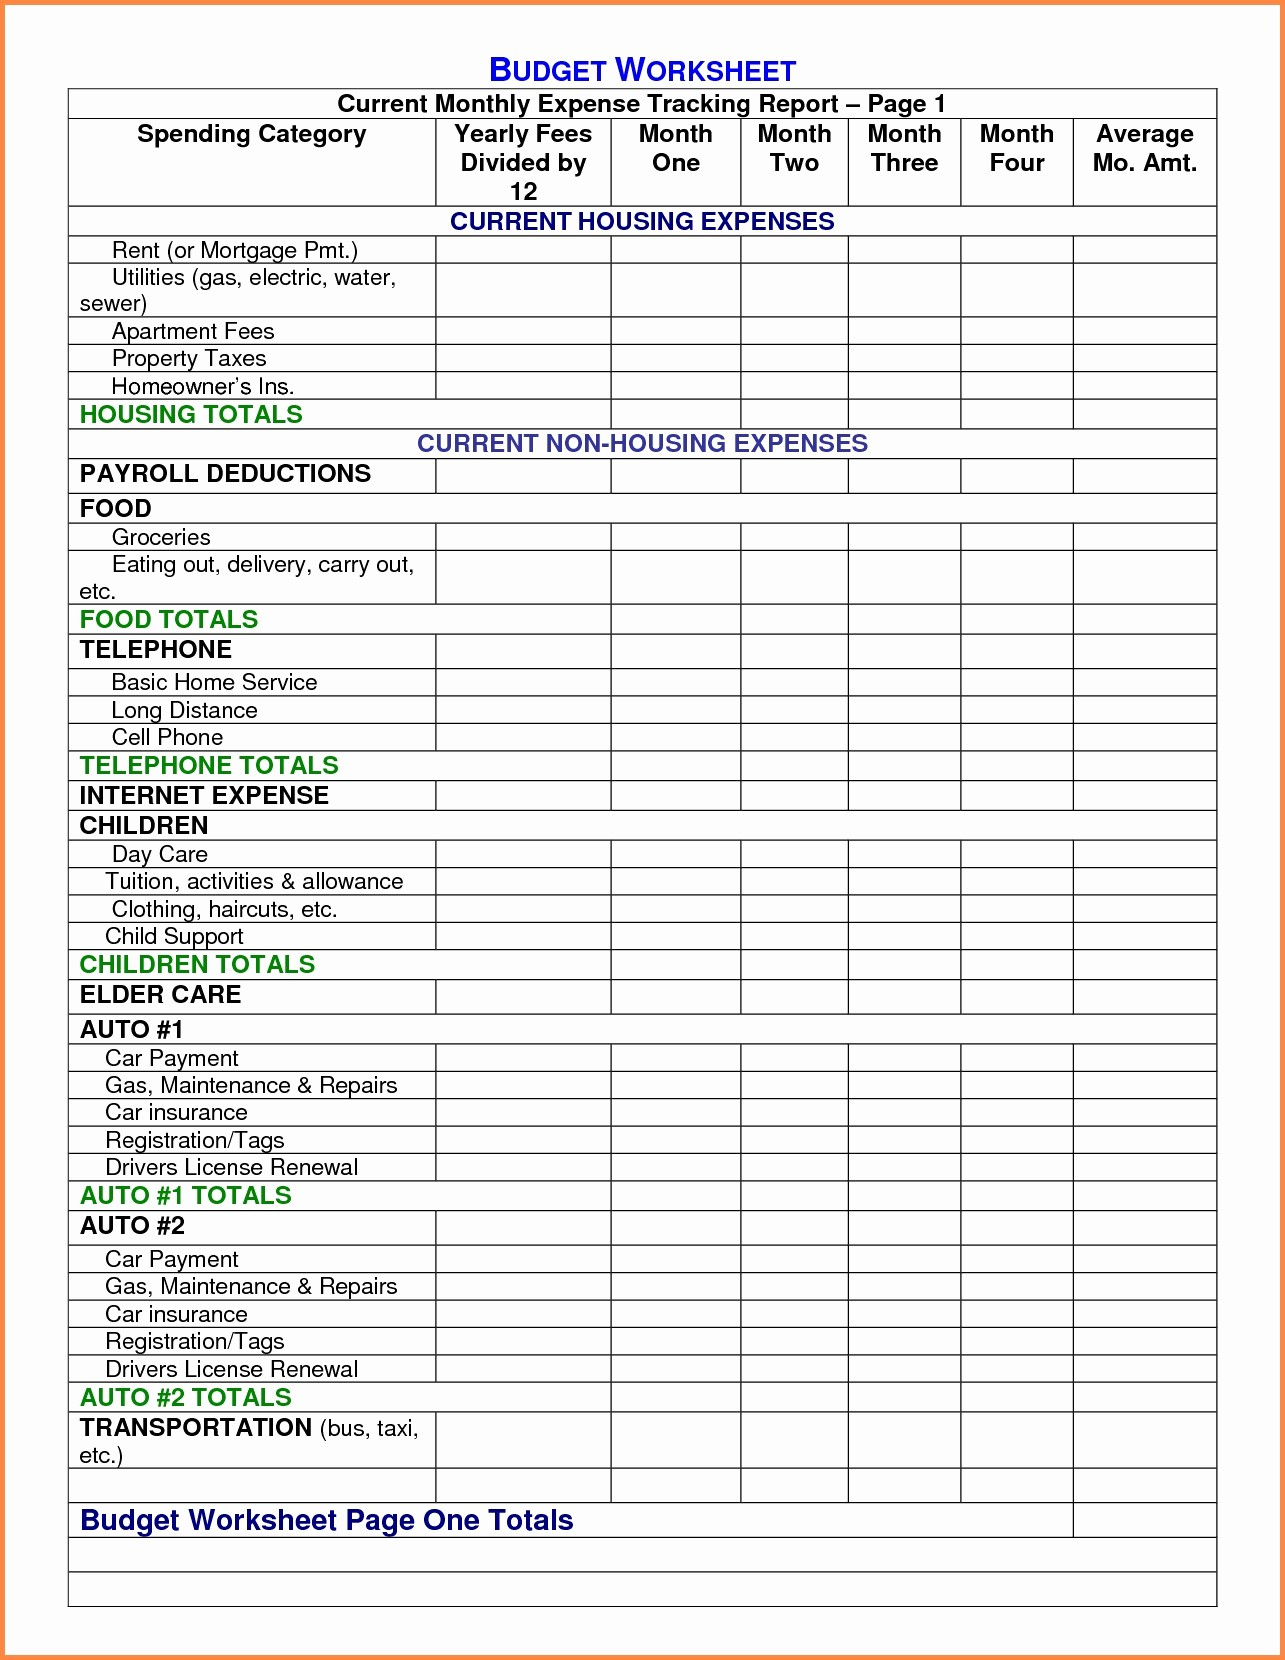 Business Budget Spreadsheet Template Save Personal Expenses With Personal Finance Spreadsheet Templates